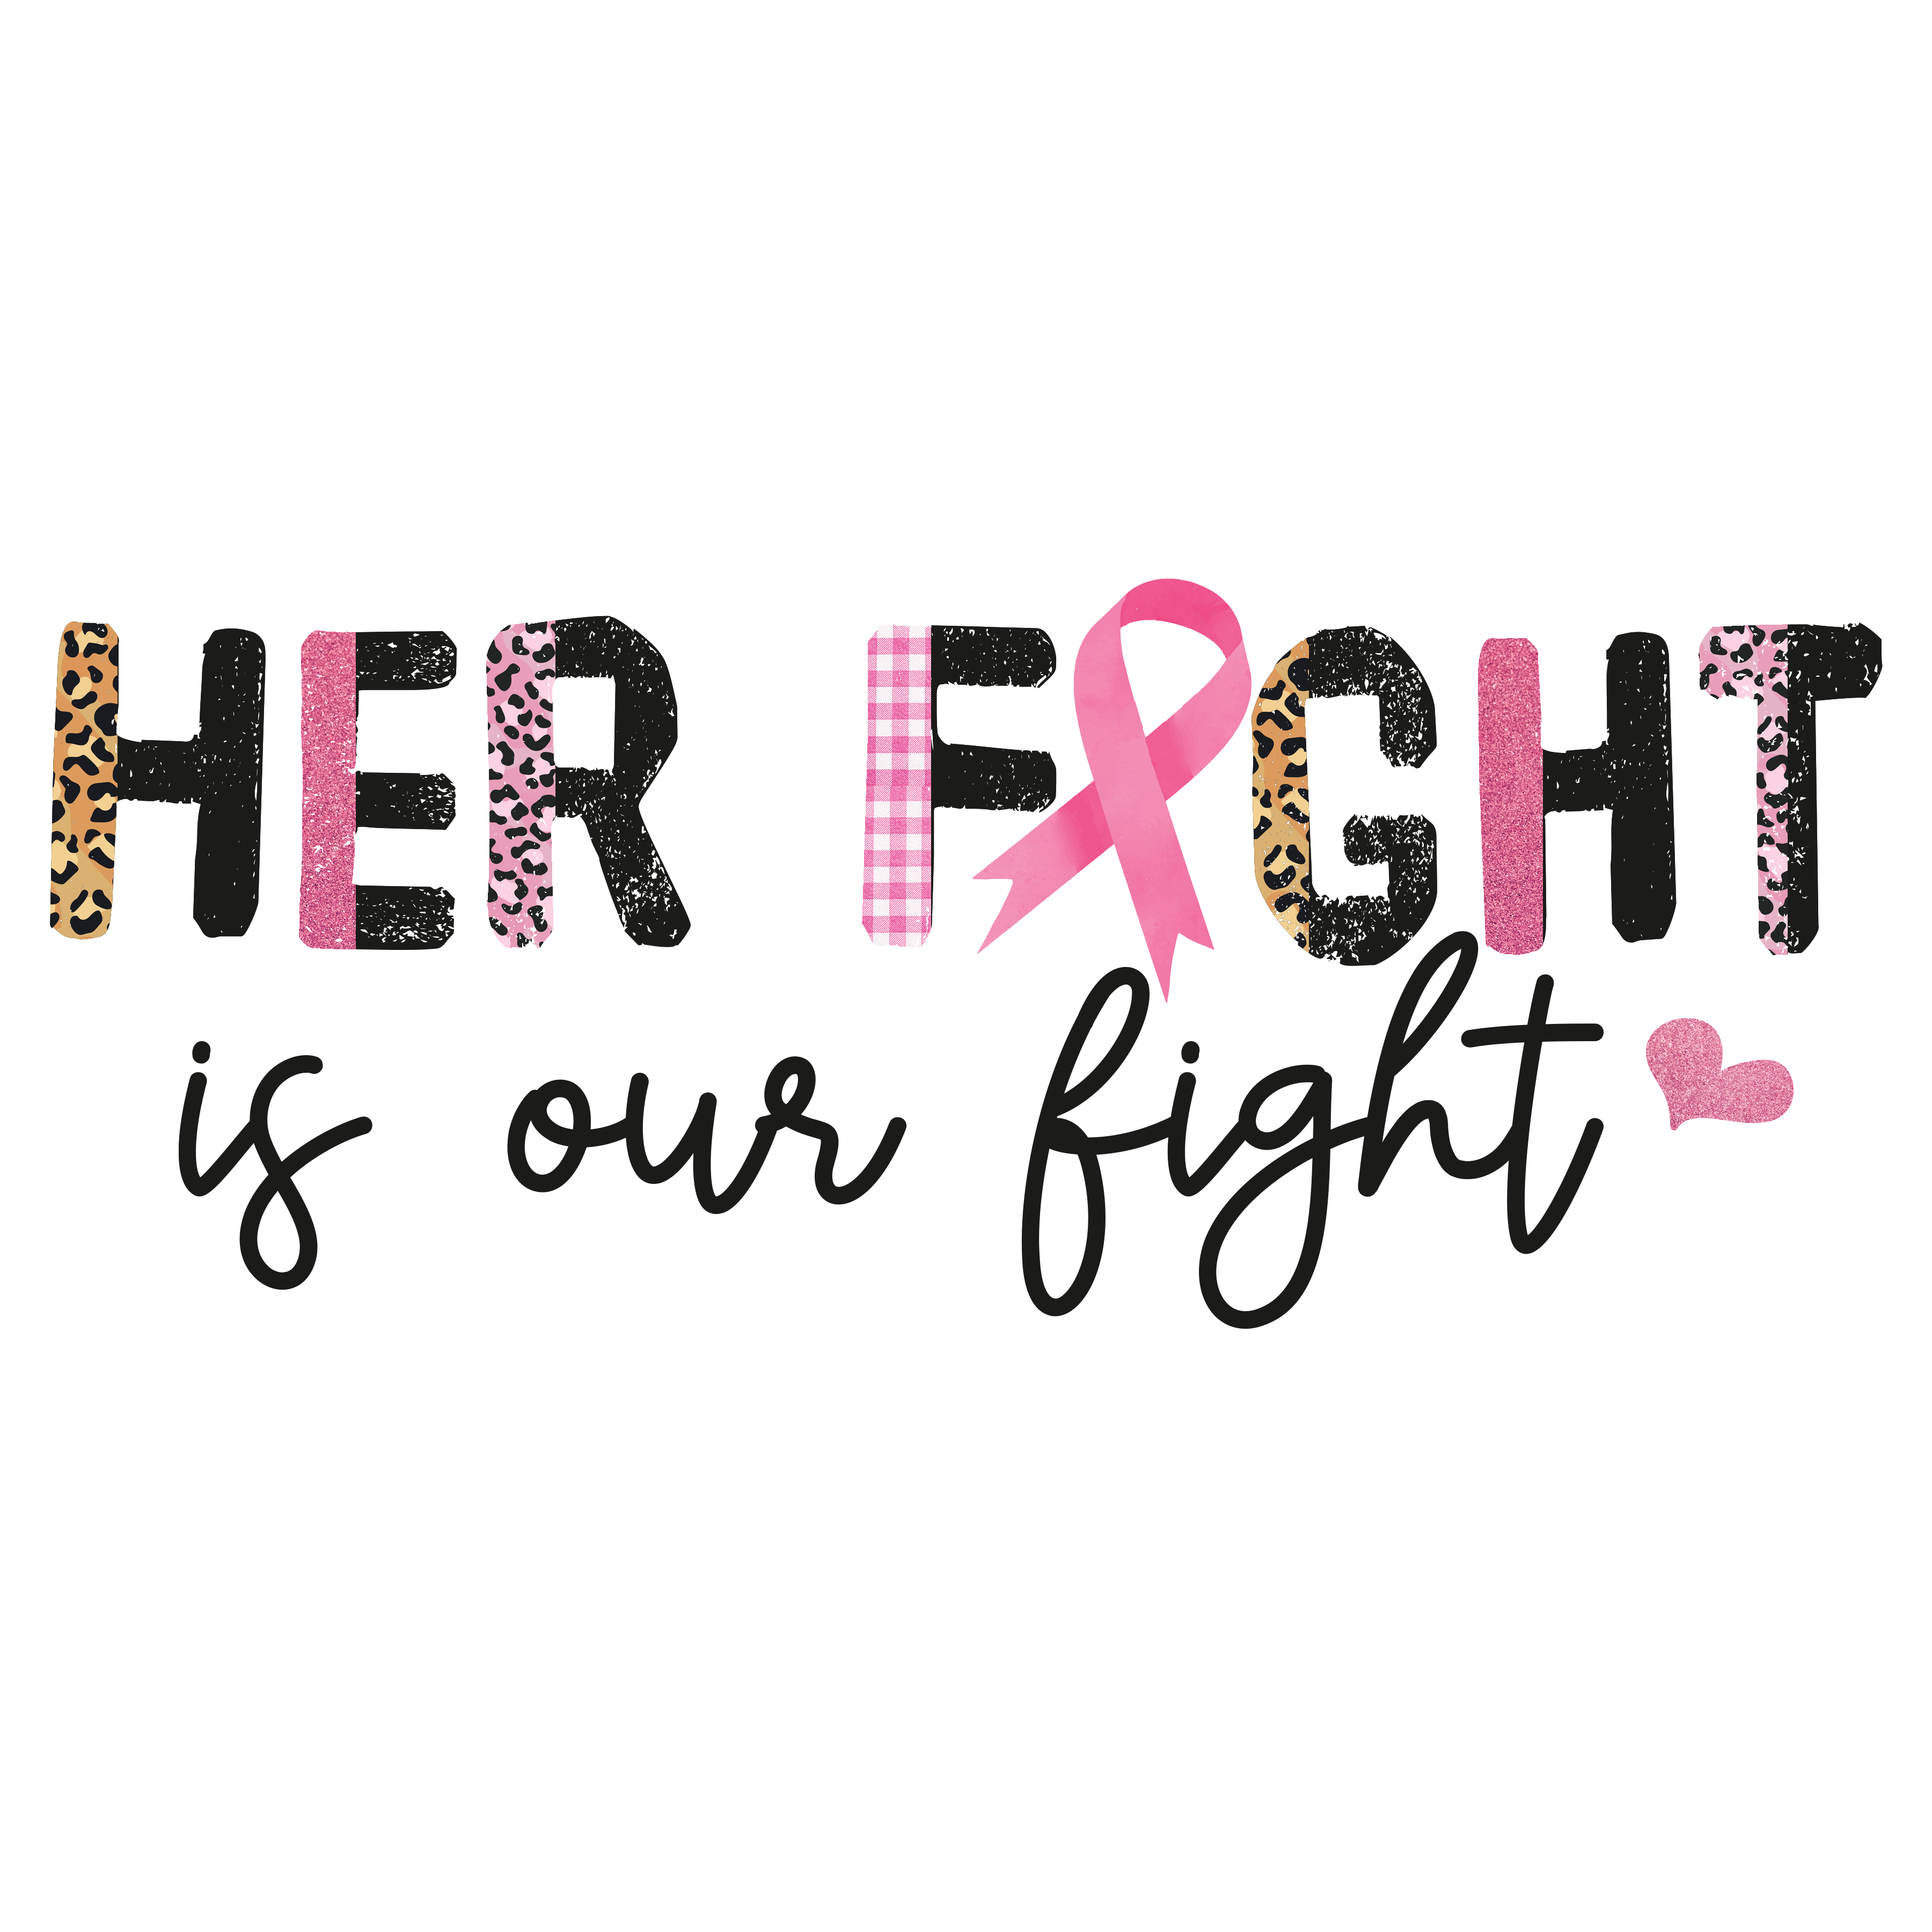 Sublimation Prints - Her Fight Is Our Fight - The Vinyl Haus